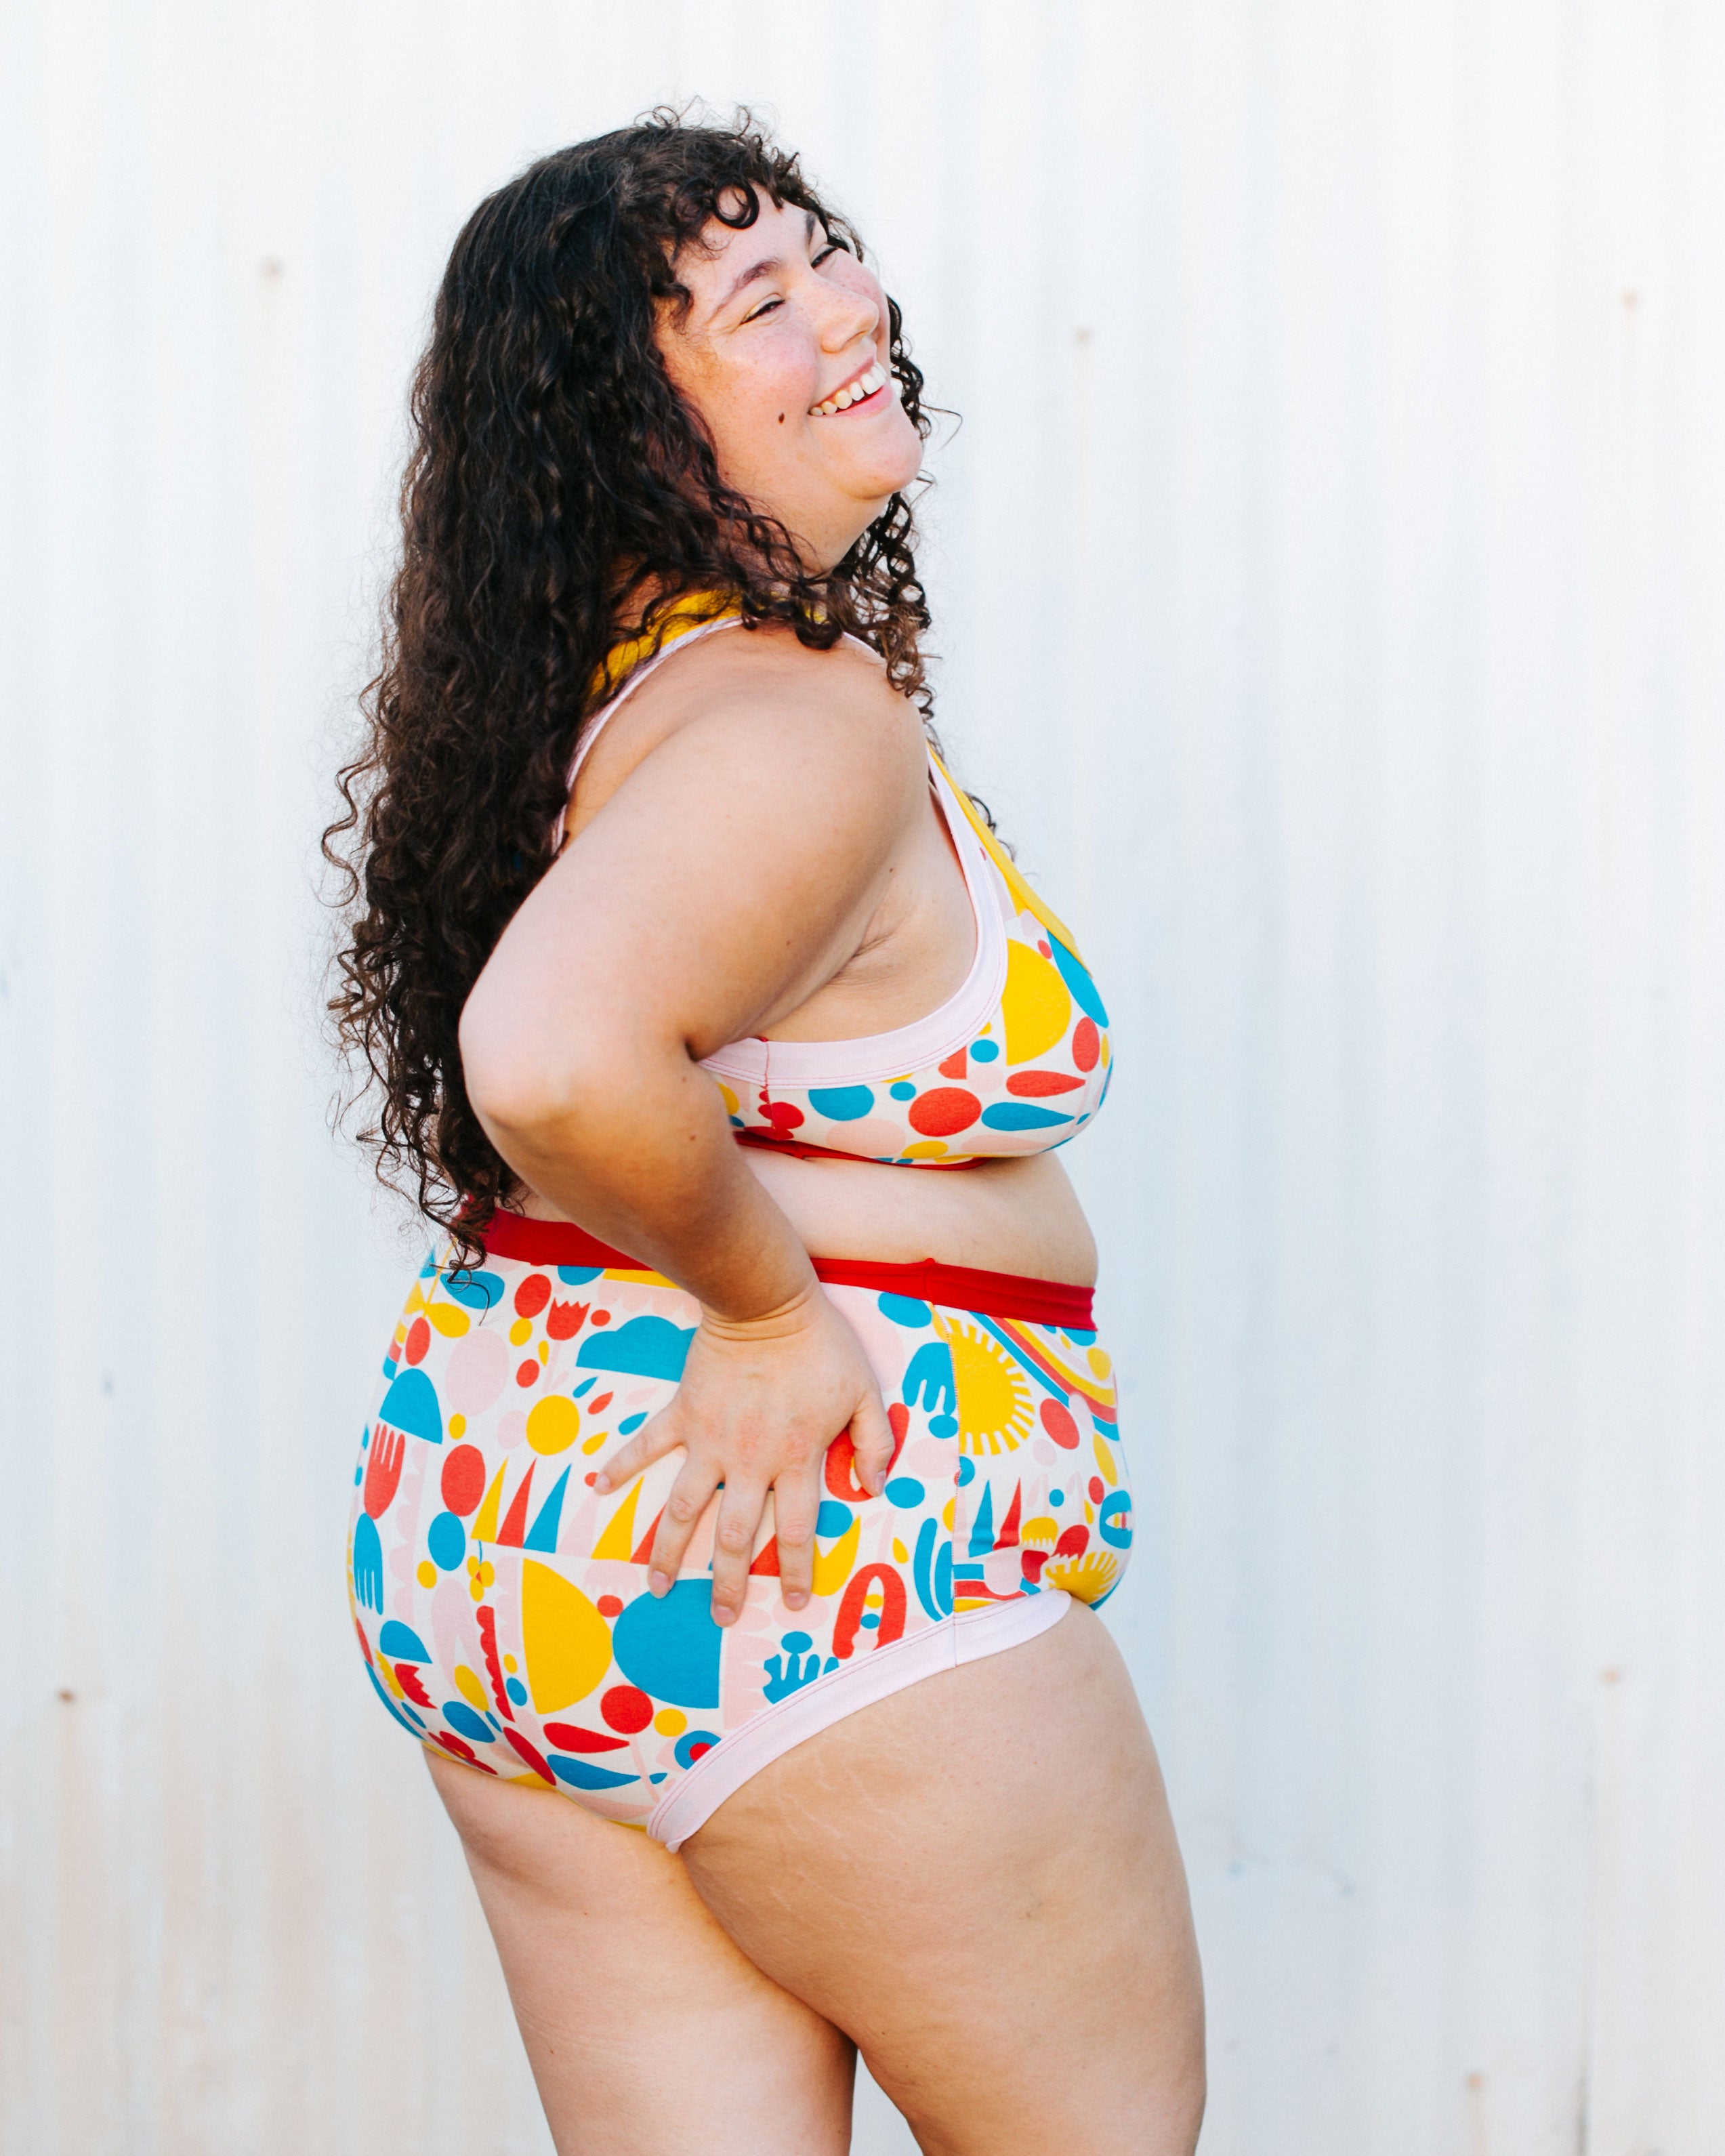 Model with her back to us wearing Original style underwear and Bralette in Balance by Lisa Congdon print: geometric shapes in pink, red, yellow, and blue colors.